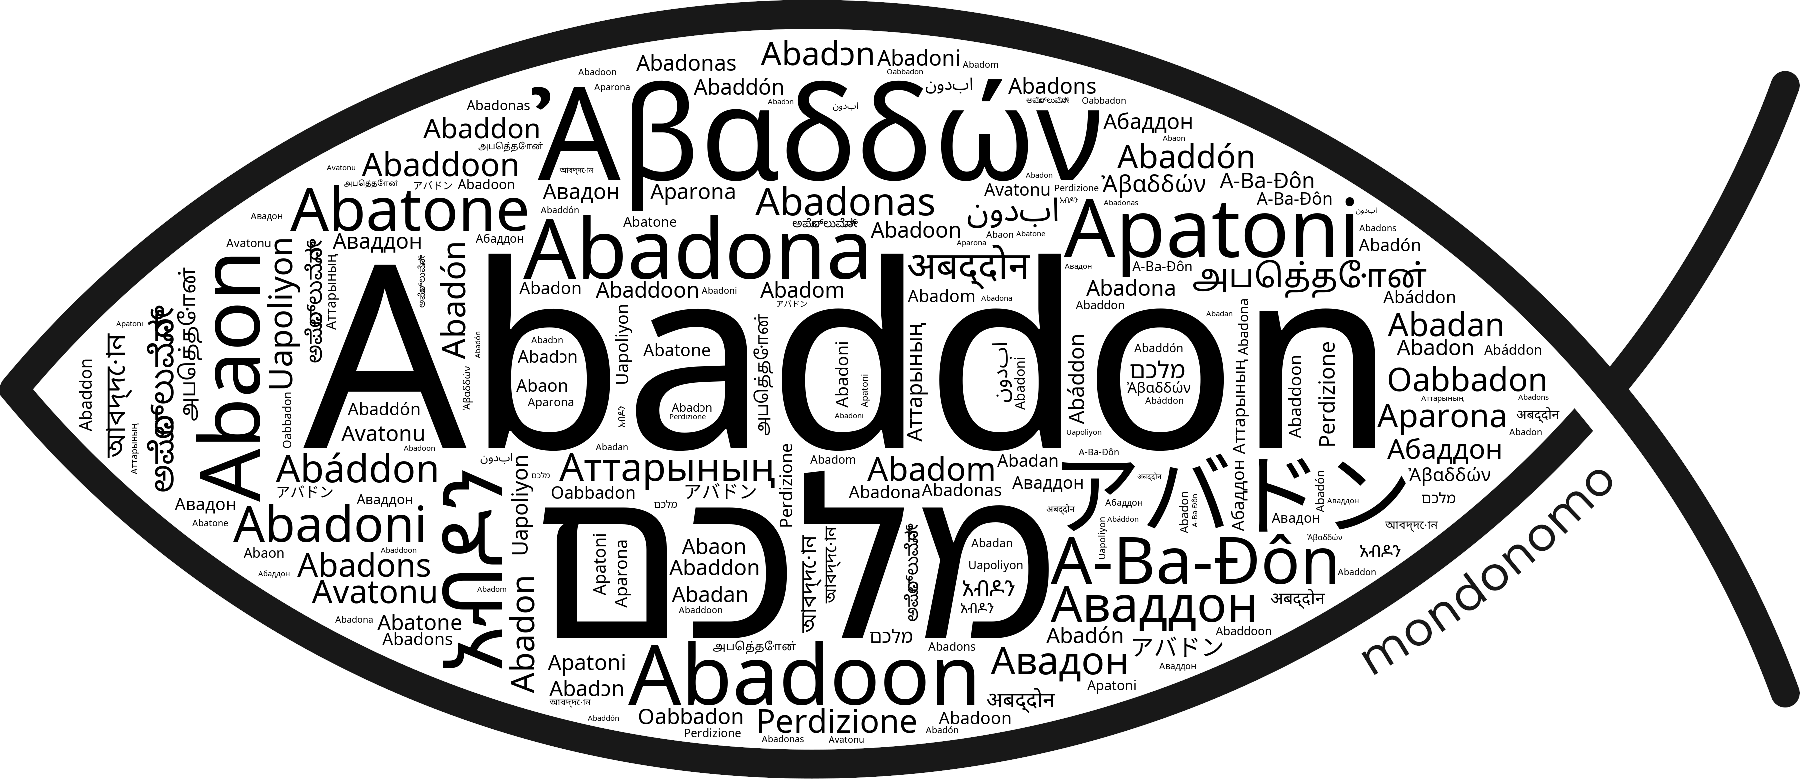 Name Abaddon in the world's Bibles